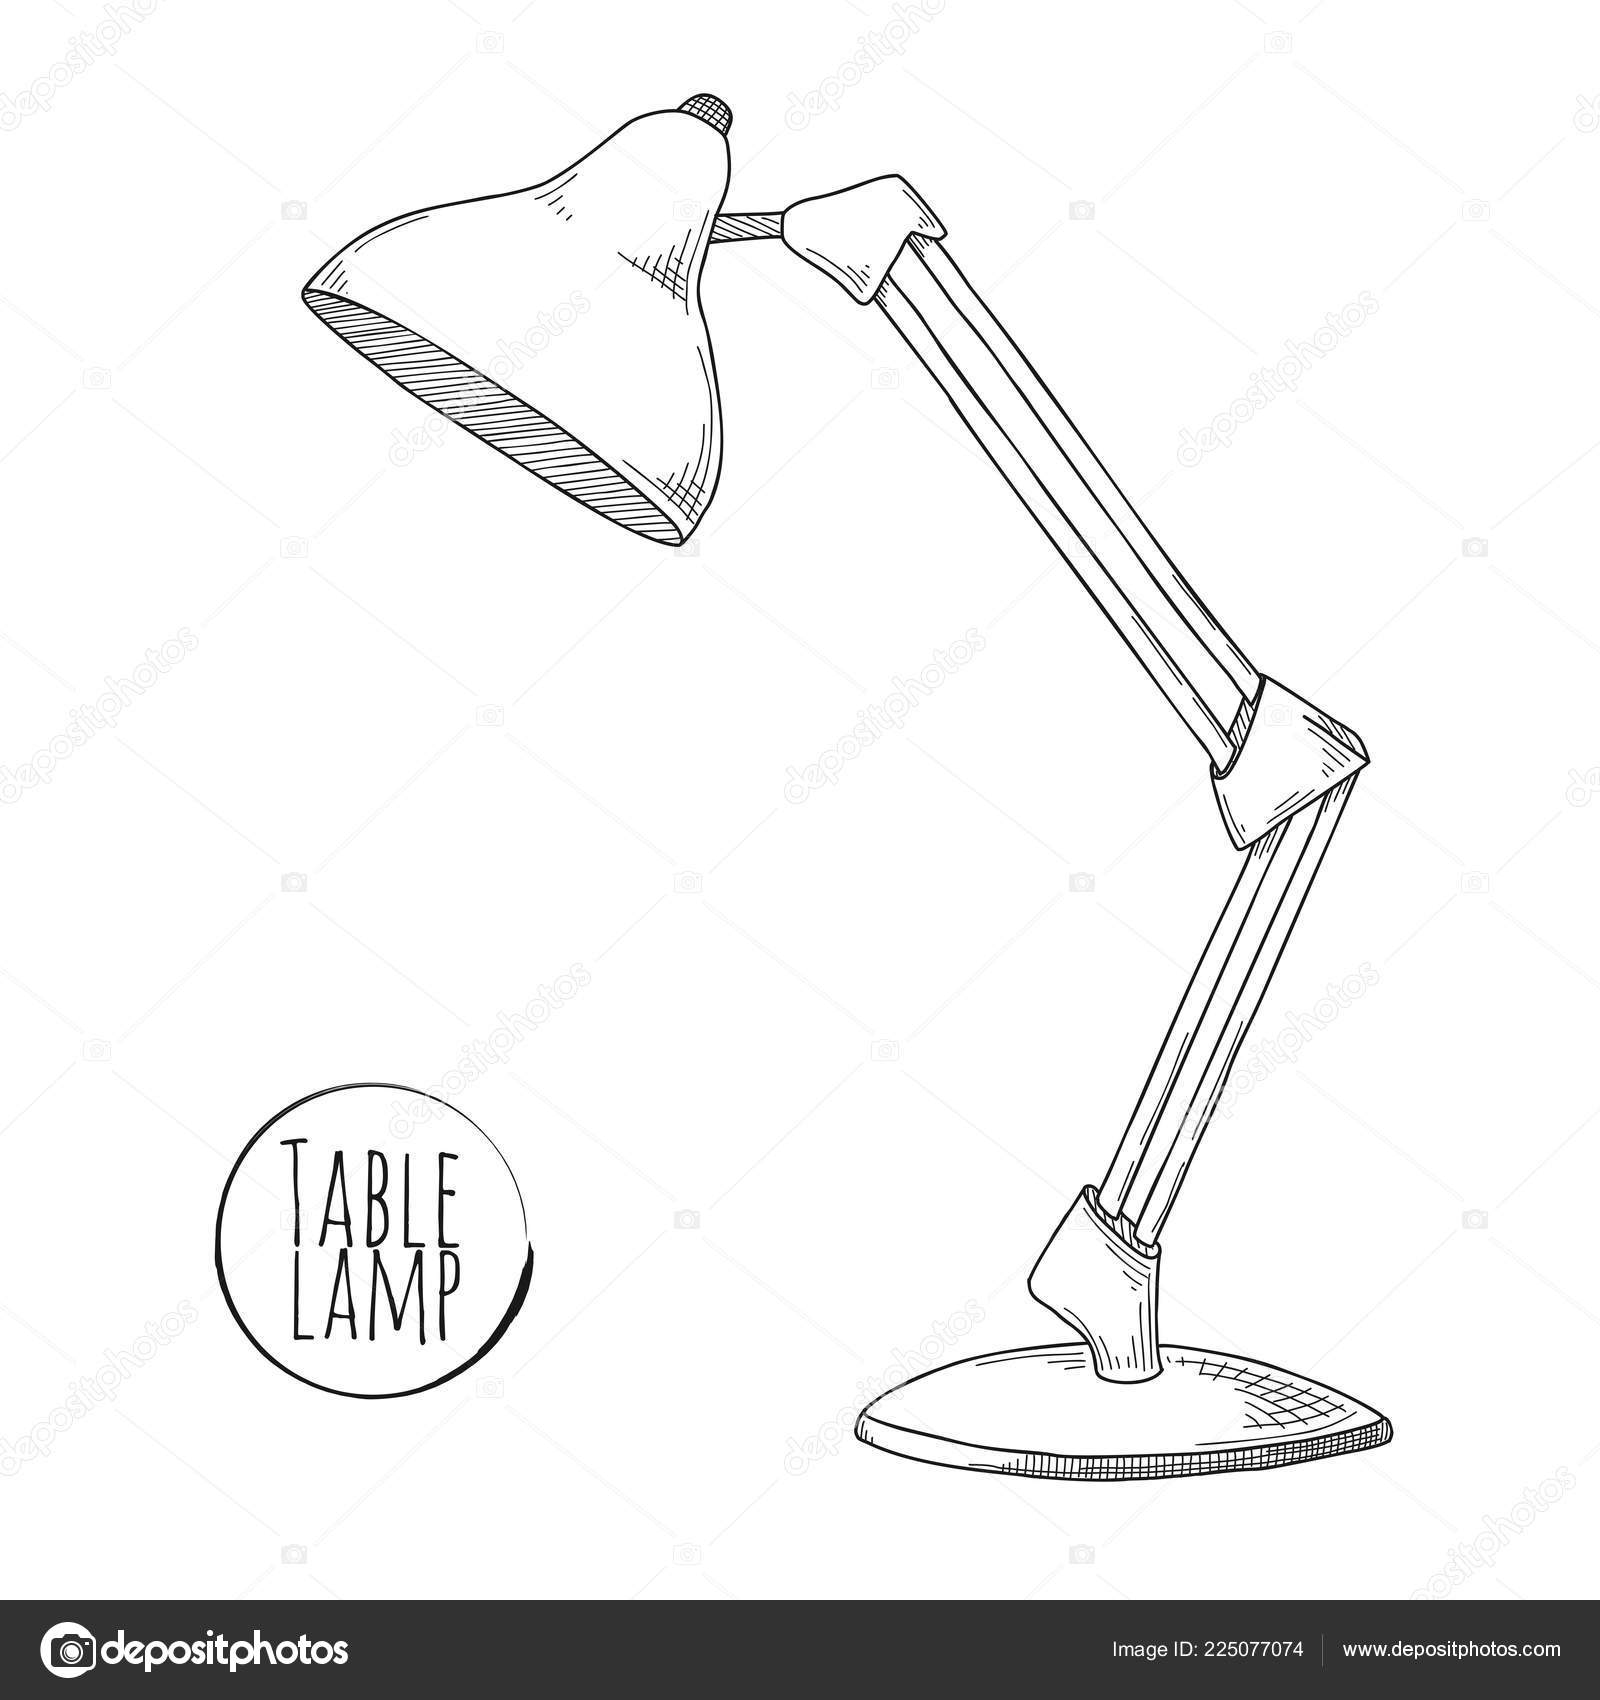 table lamp sketch